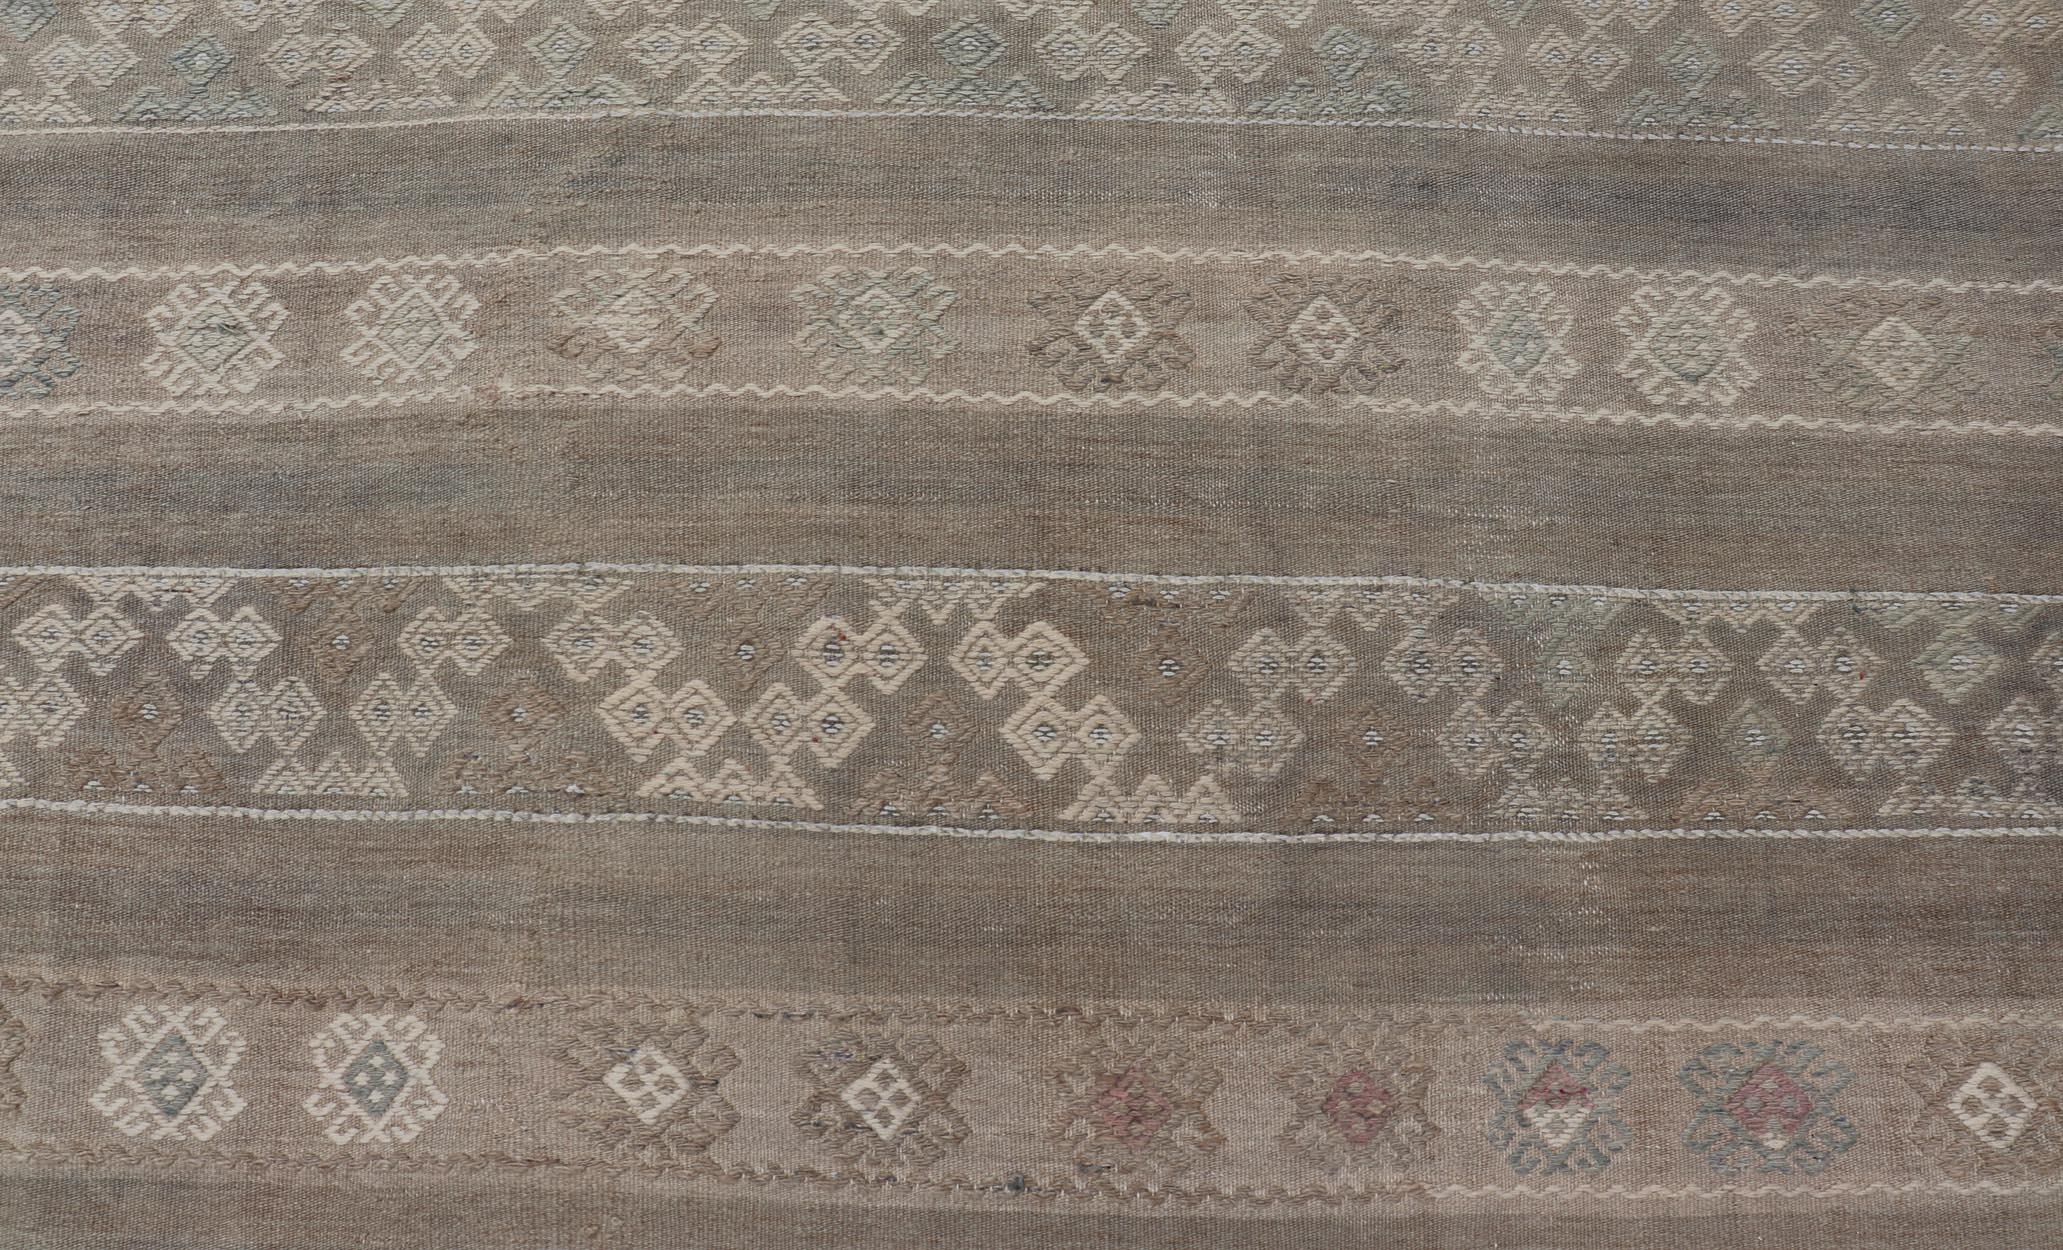 Vintage Turkish Kilim with Stripes in Taupe, Green, Tan, Cream and Brown For Sale 4